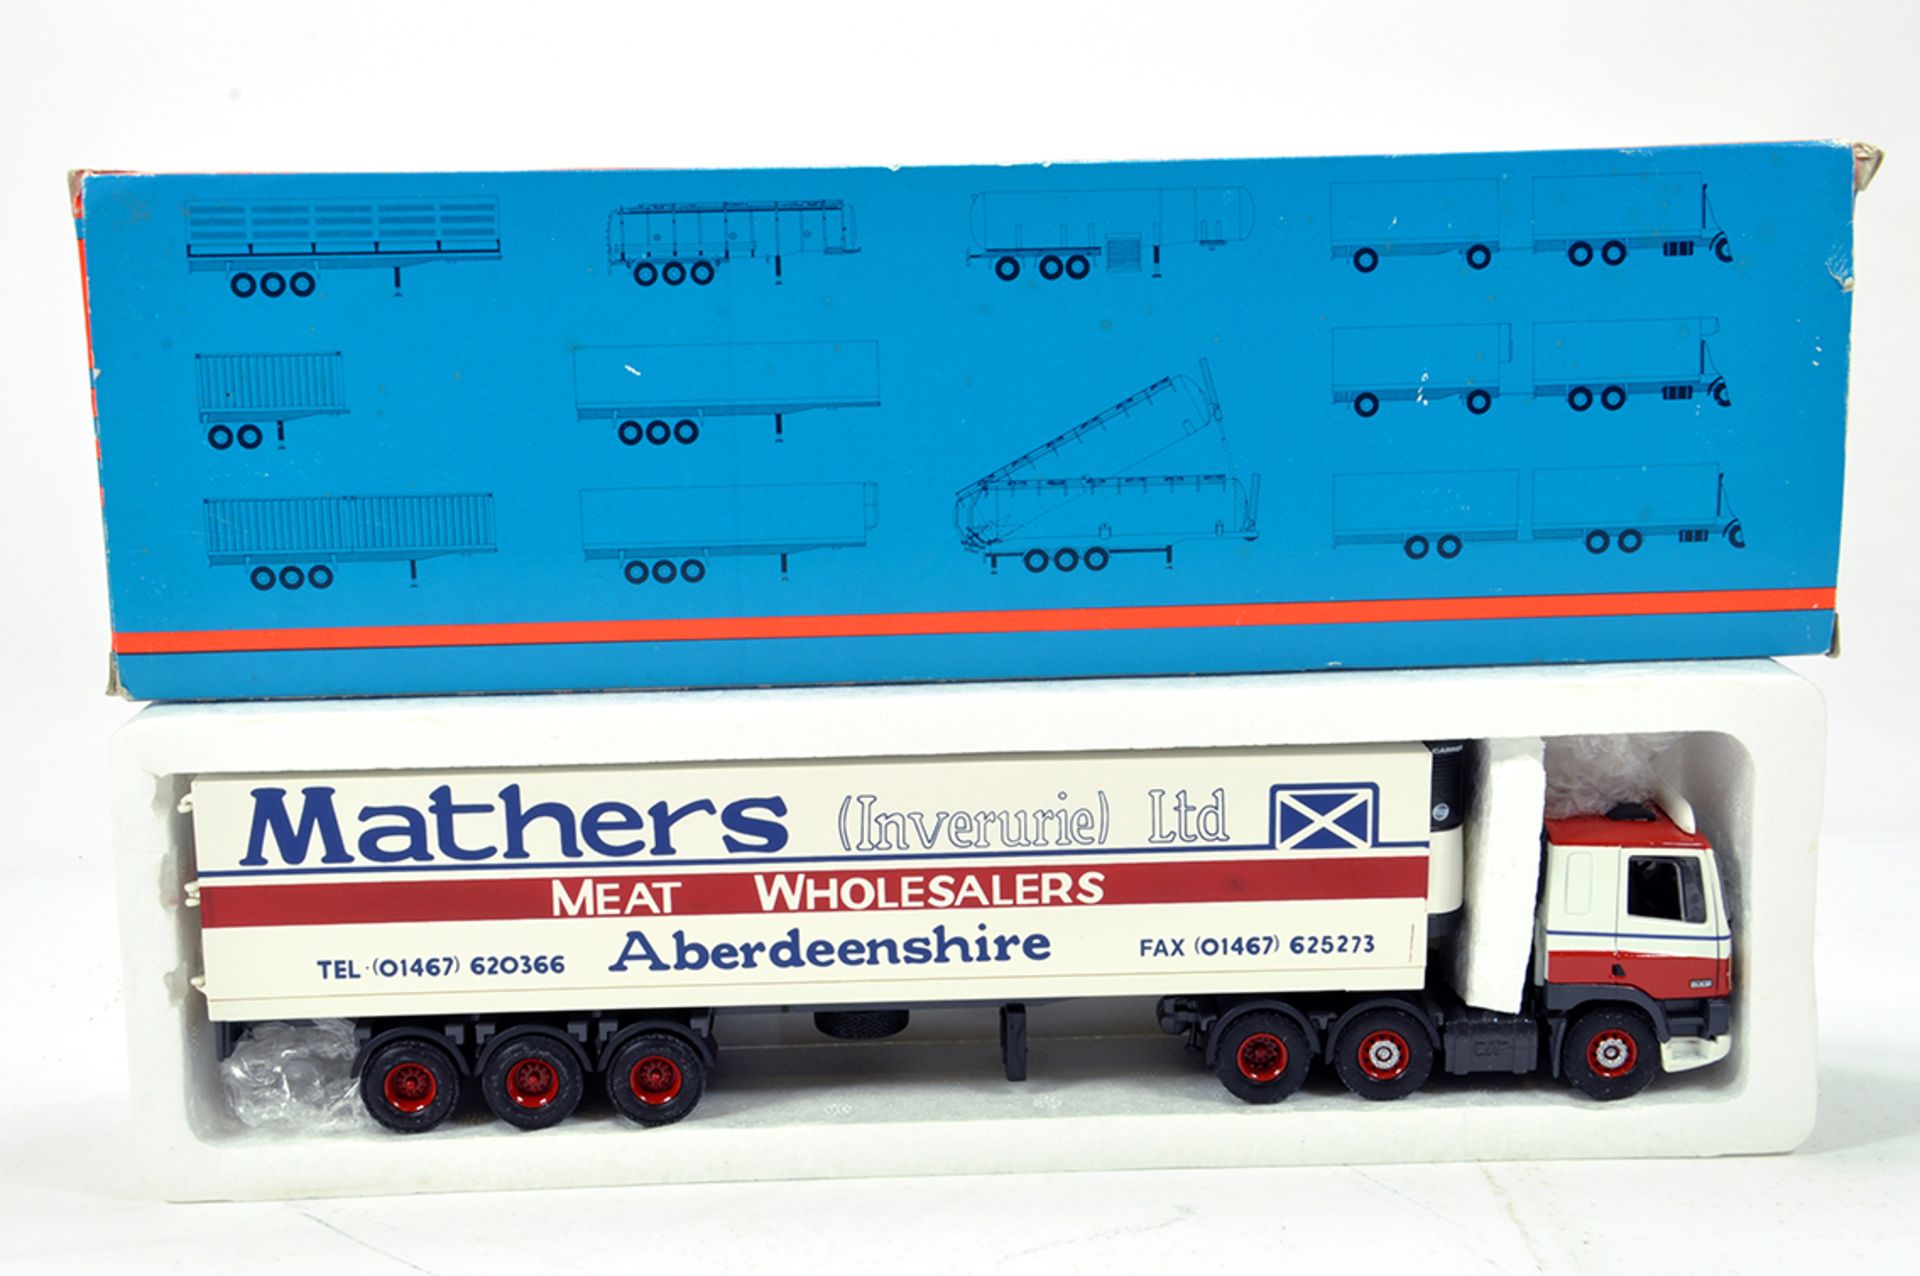 Tekno 1/50 Diecast Truck Issue Comprising Leyland DAF Fridge Trailer in Livery of Mathers. NM to M